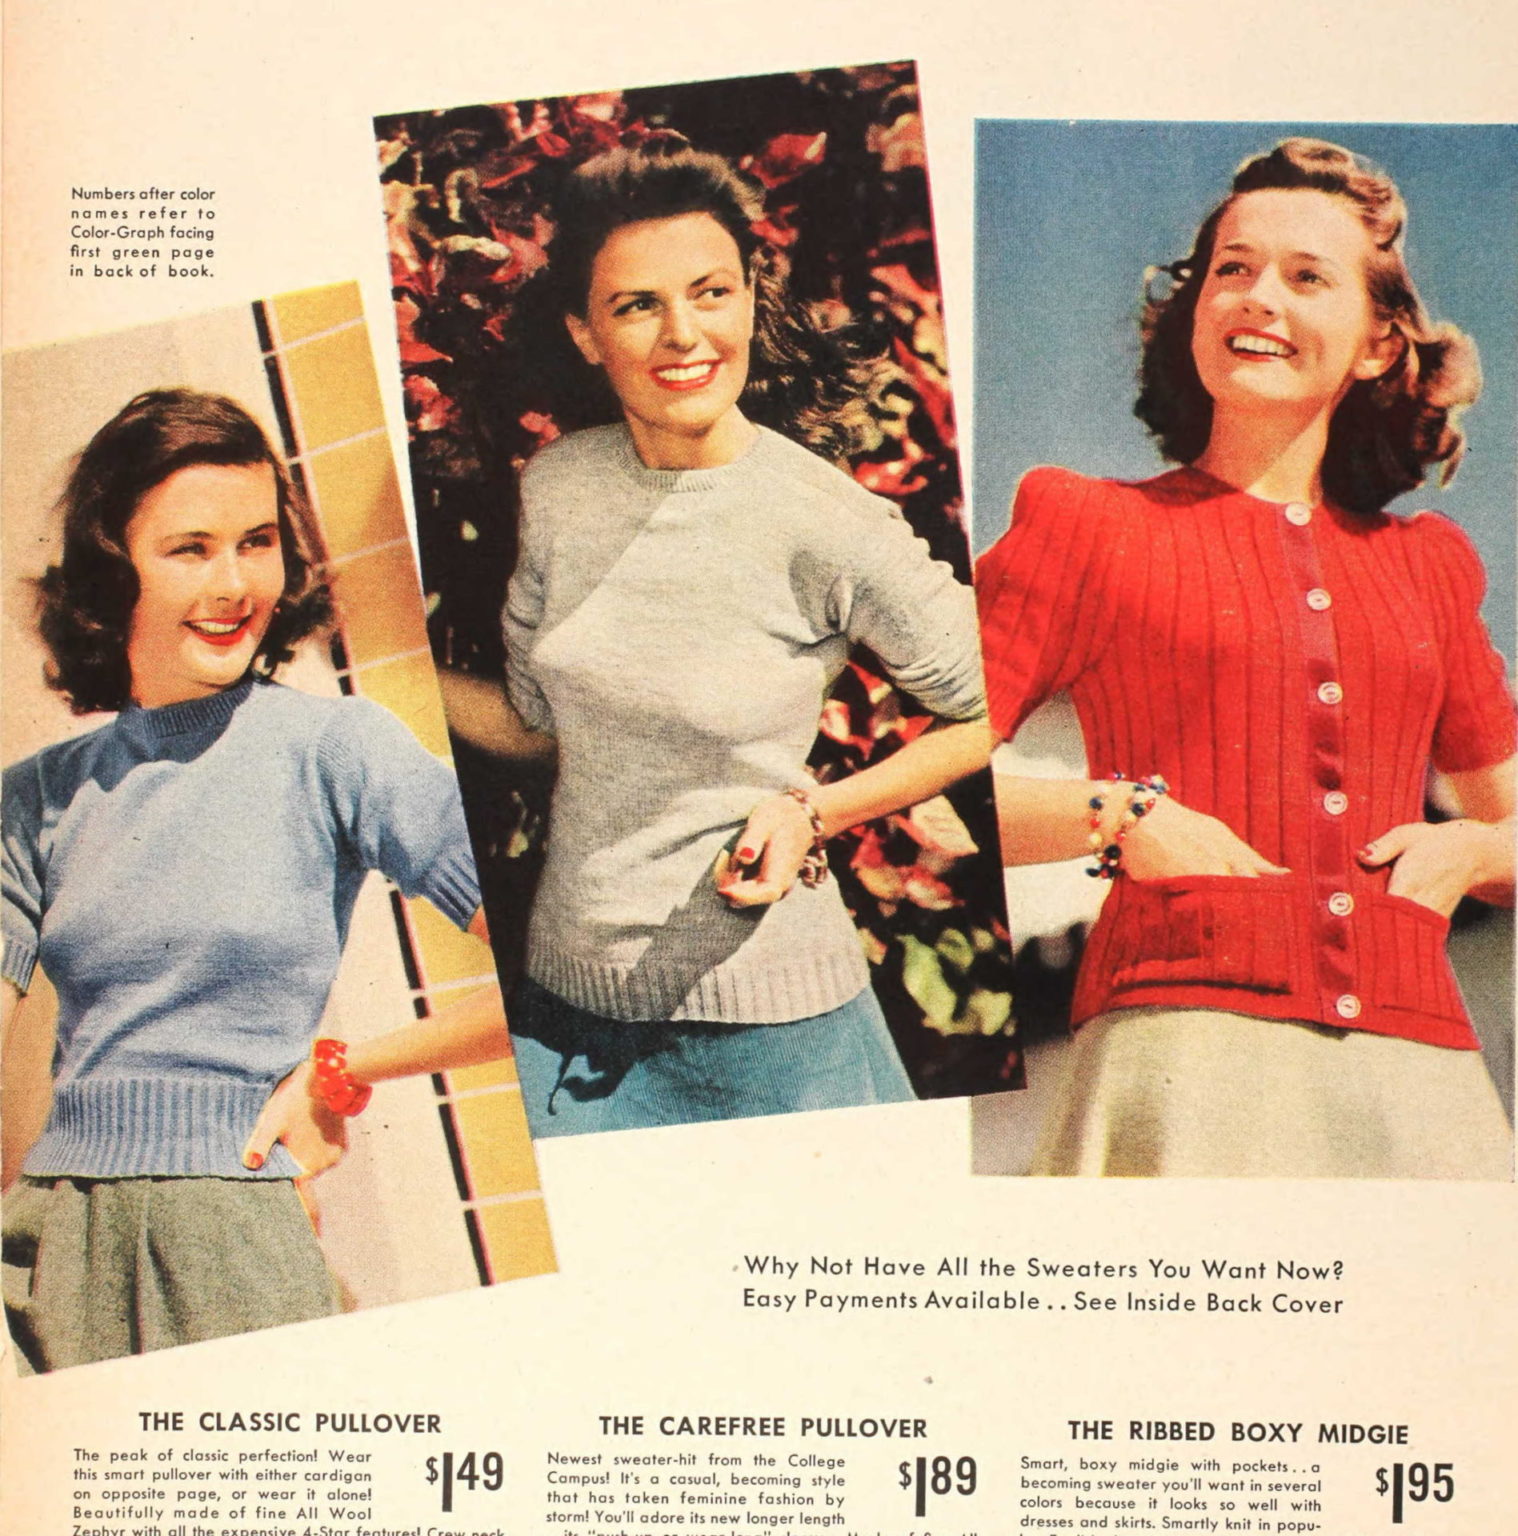 1940s Sweater Styles - Women's Pullovers and Cardigans